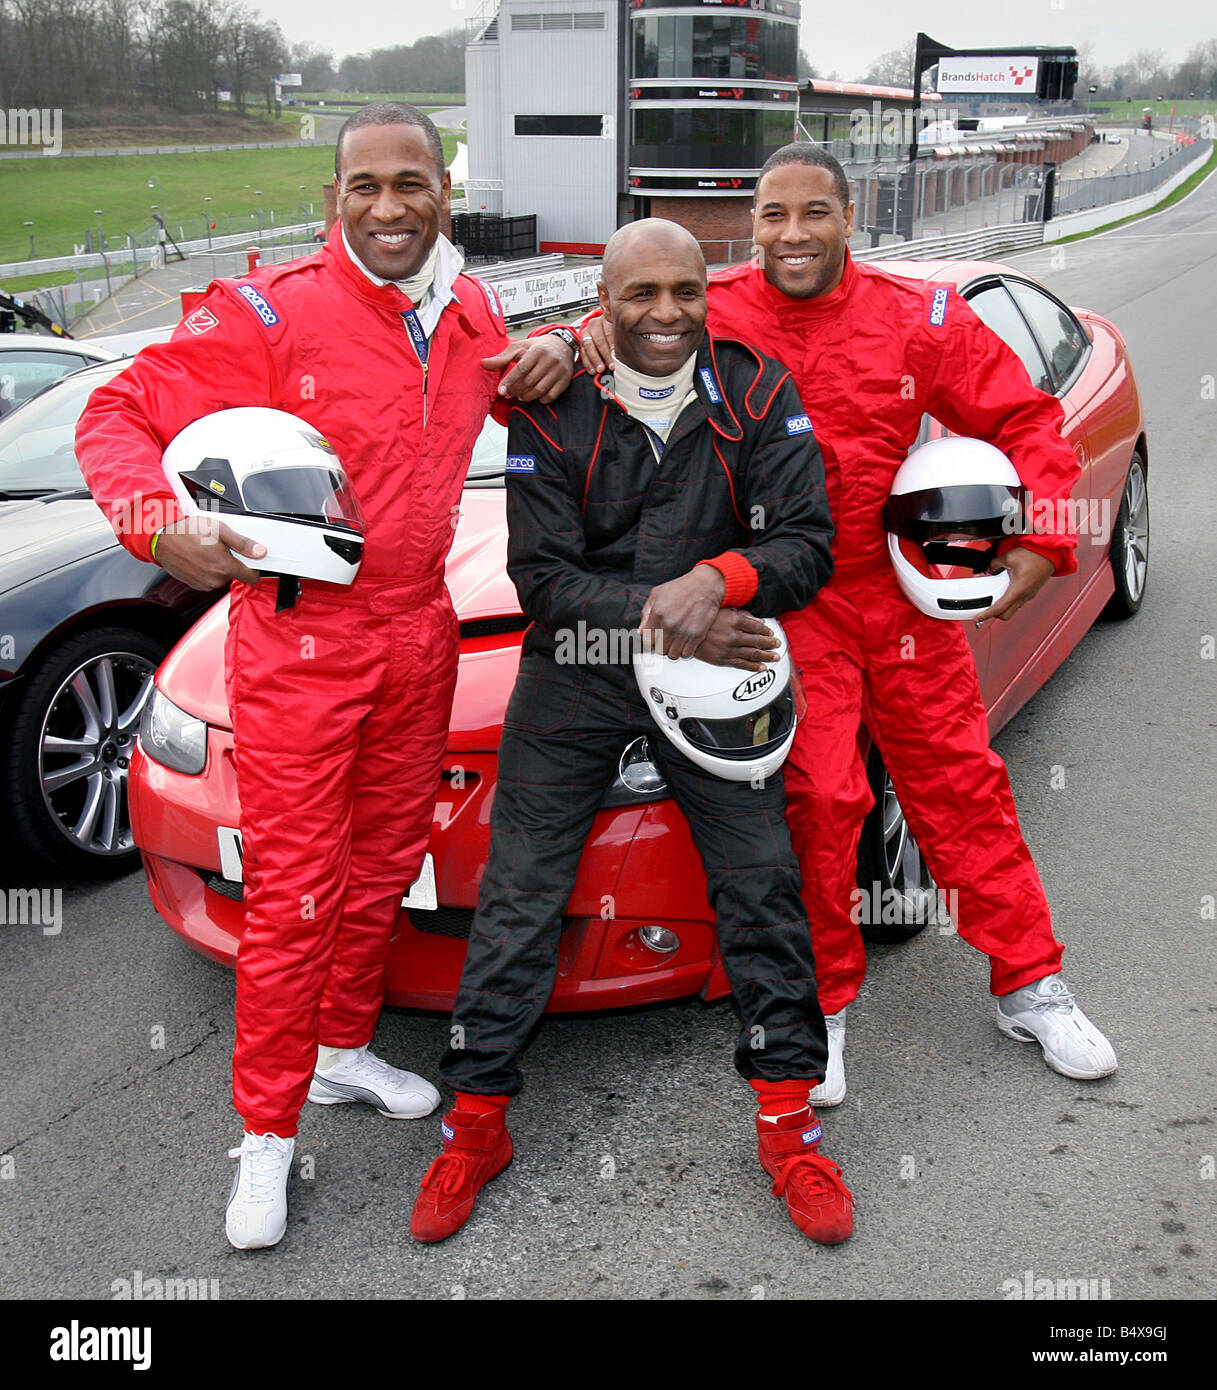 Drivers, including ex footballers, try out for the first Caribbeen Racing Team at Brands Hatch today. Les Ferdinand, Luther Blissett and John Barnes.;29th January 2007 Stock Photo